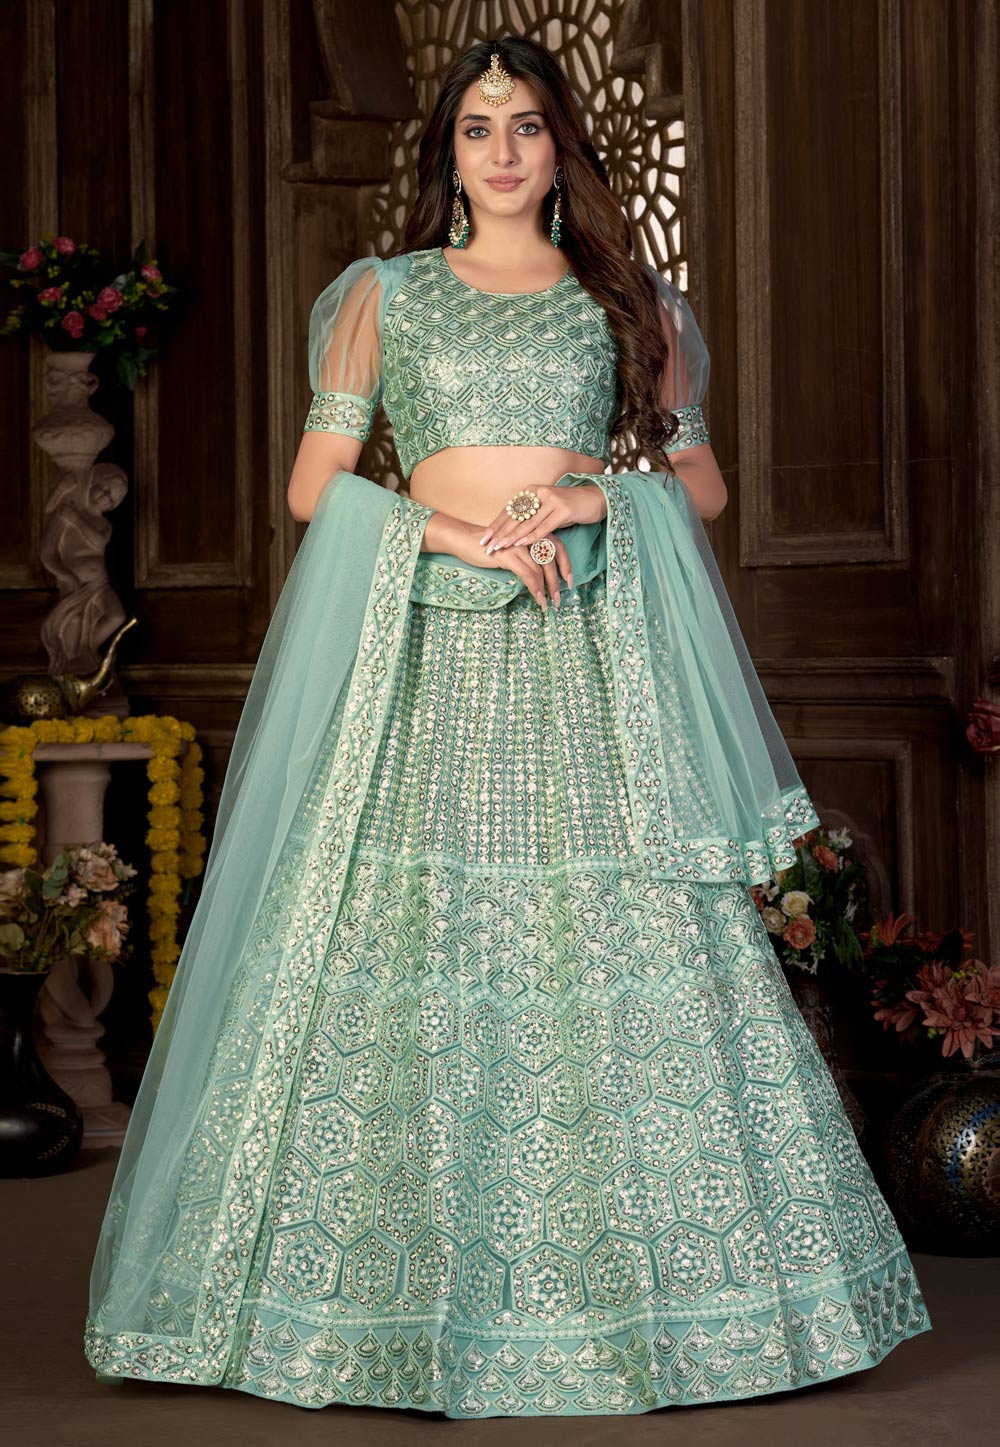 https://resources.indianclothstore.com/resources/productimages/800326082022-Sea-Green-Net-A-Line-Lehenga-Choli.jpg